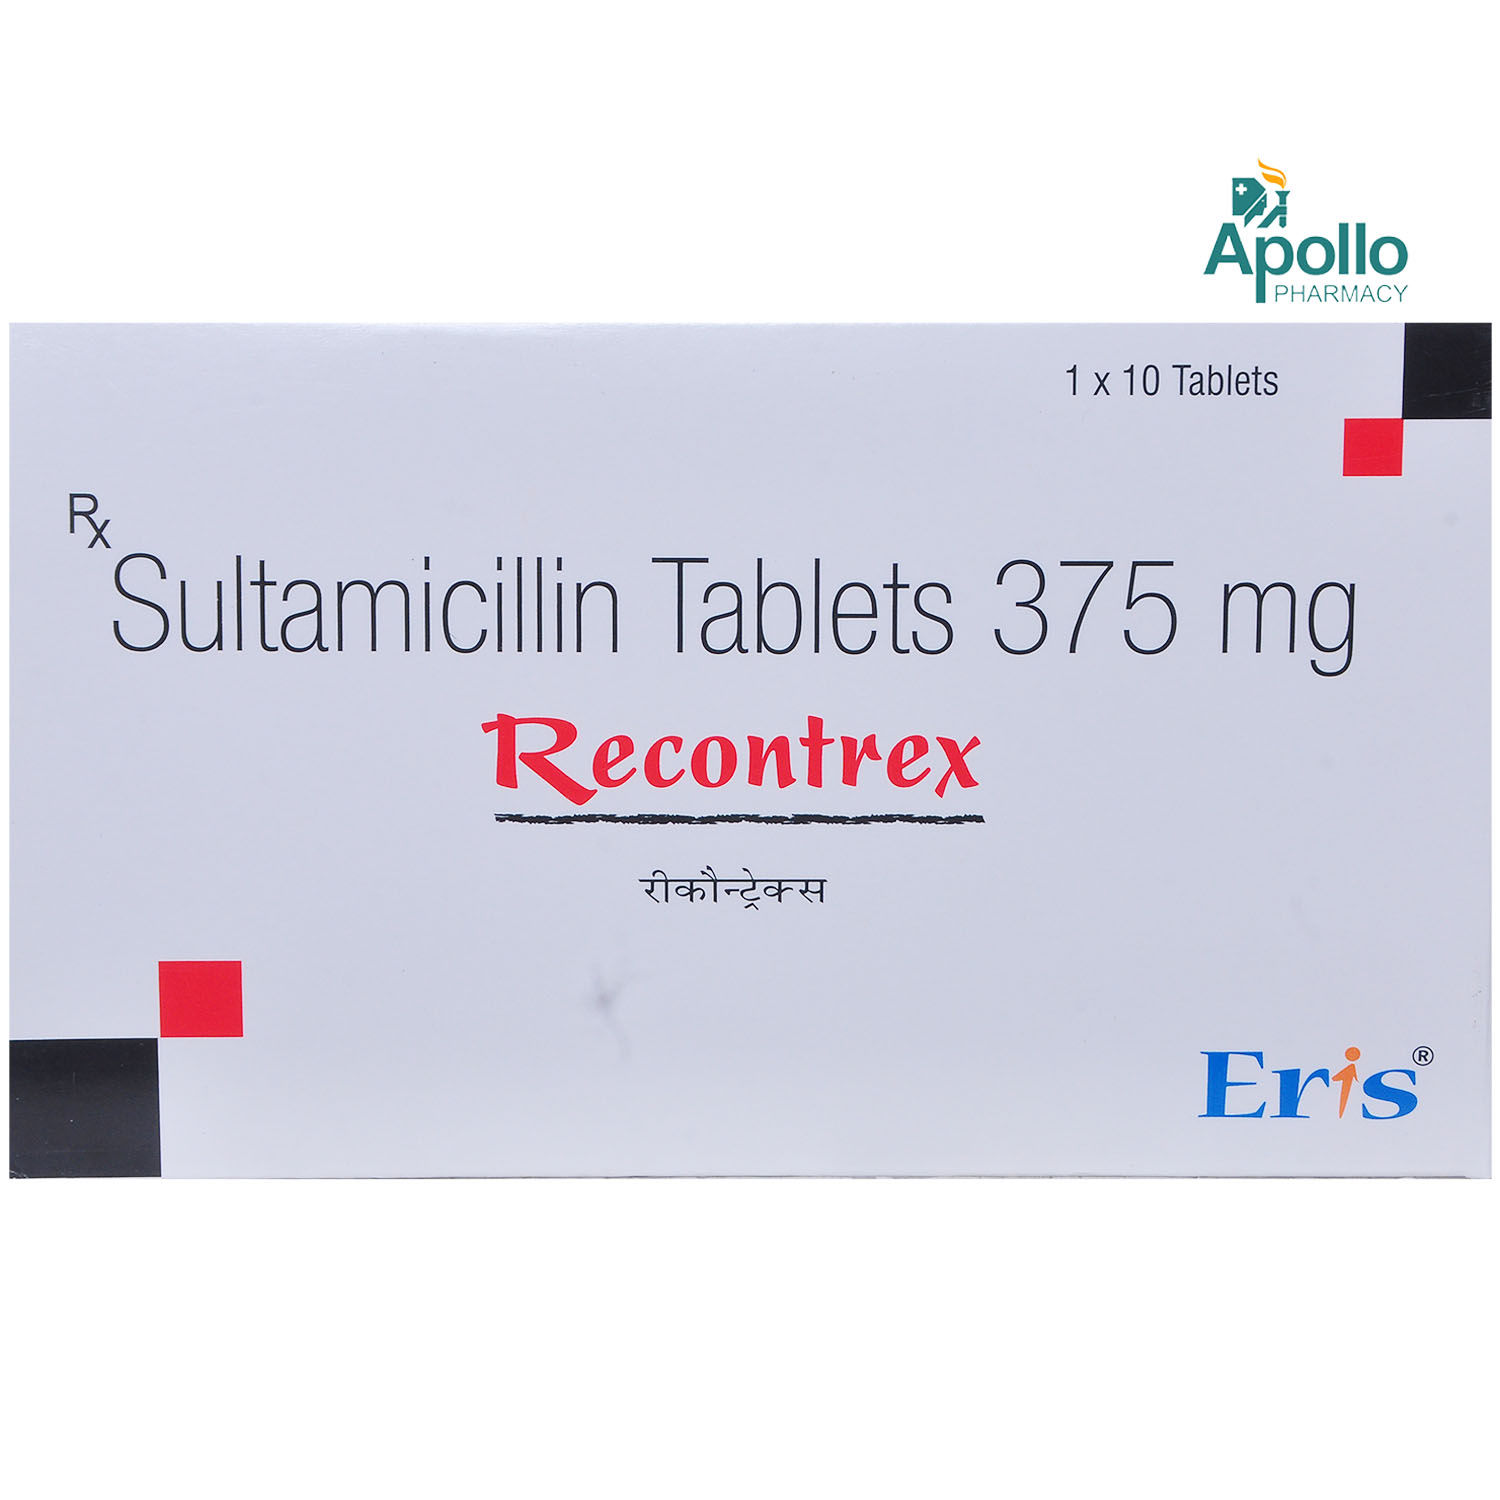 RECONTREX TABLET, Pack of 10 TABLETS